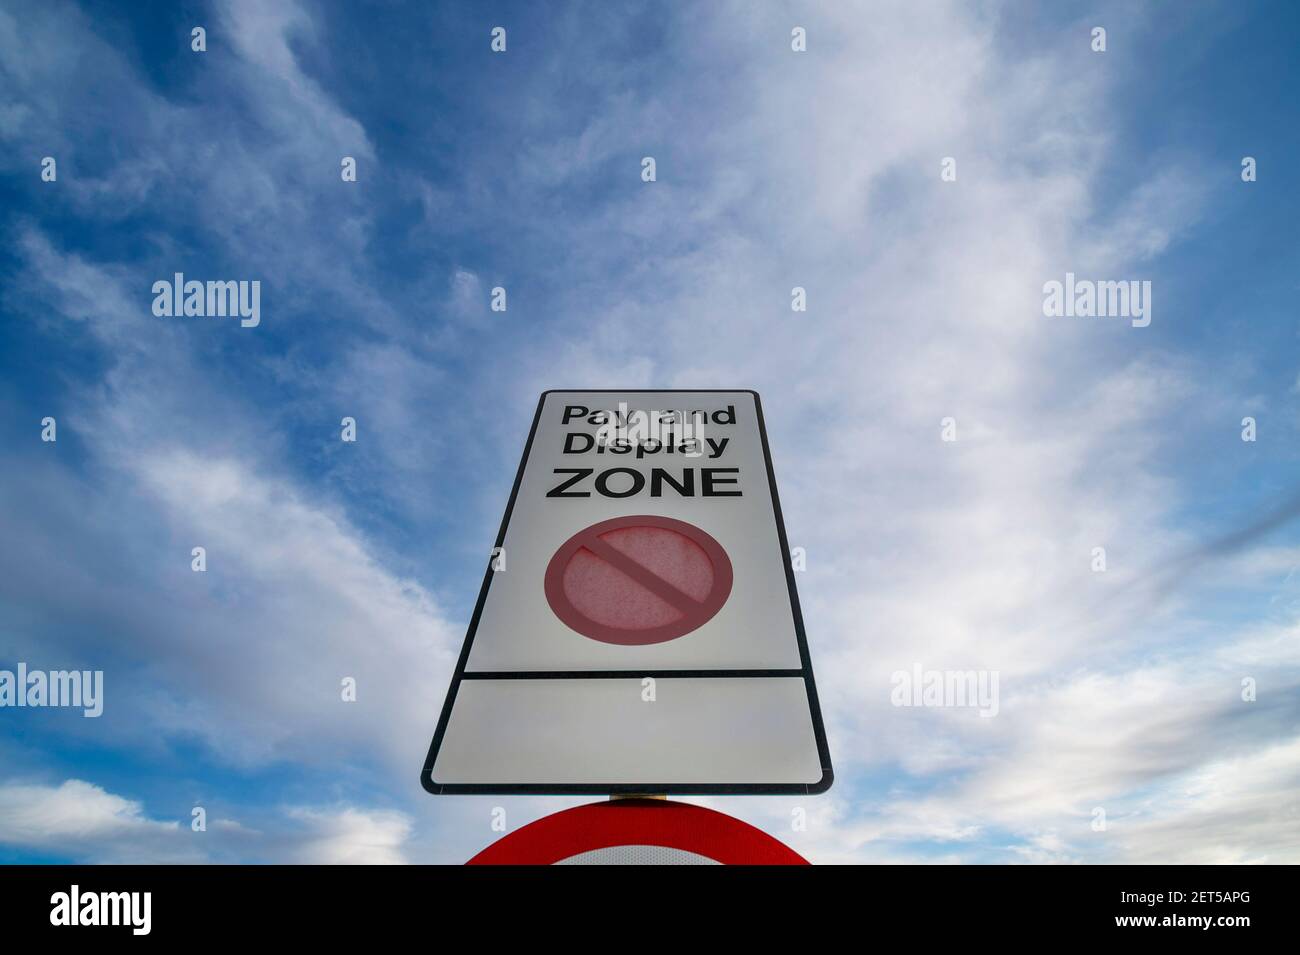 Pay and Display Zone sign in a car park against a blue sky Stock Photo